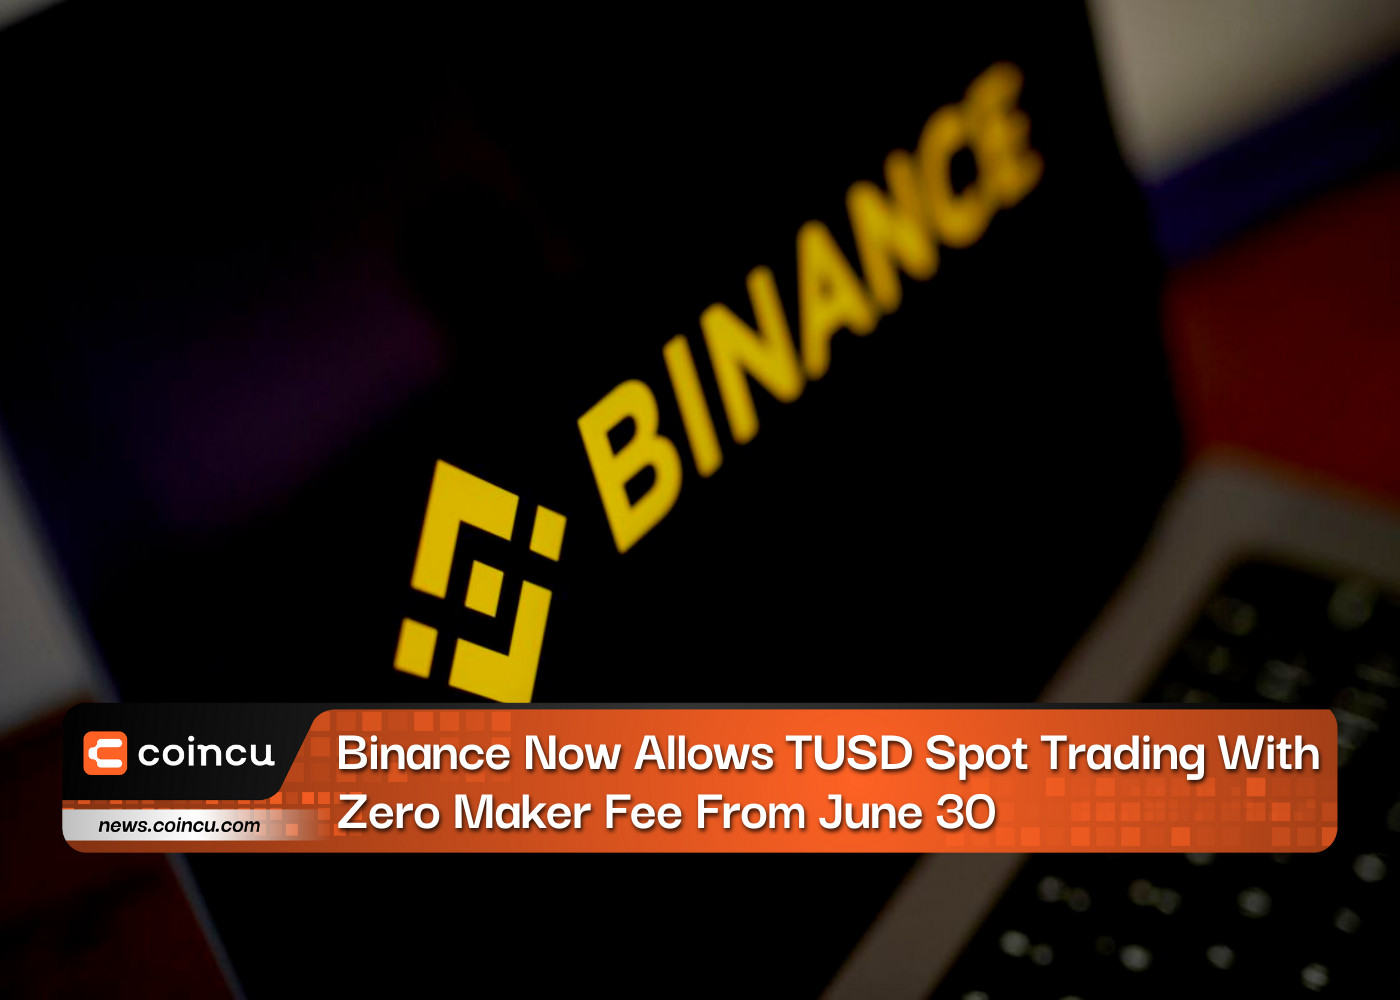 Binance Now Allows TUSD Spot Trading With Zero Maker Fee From June 30